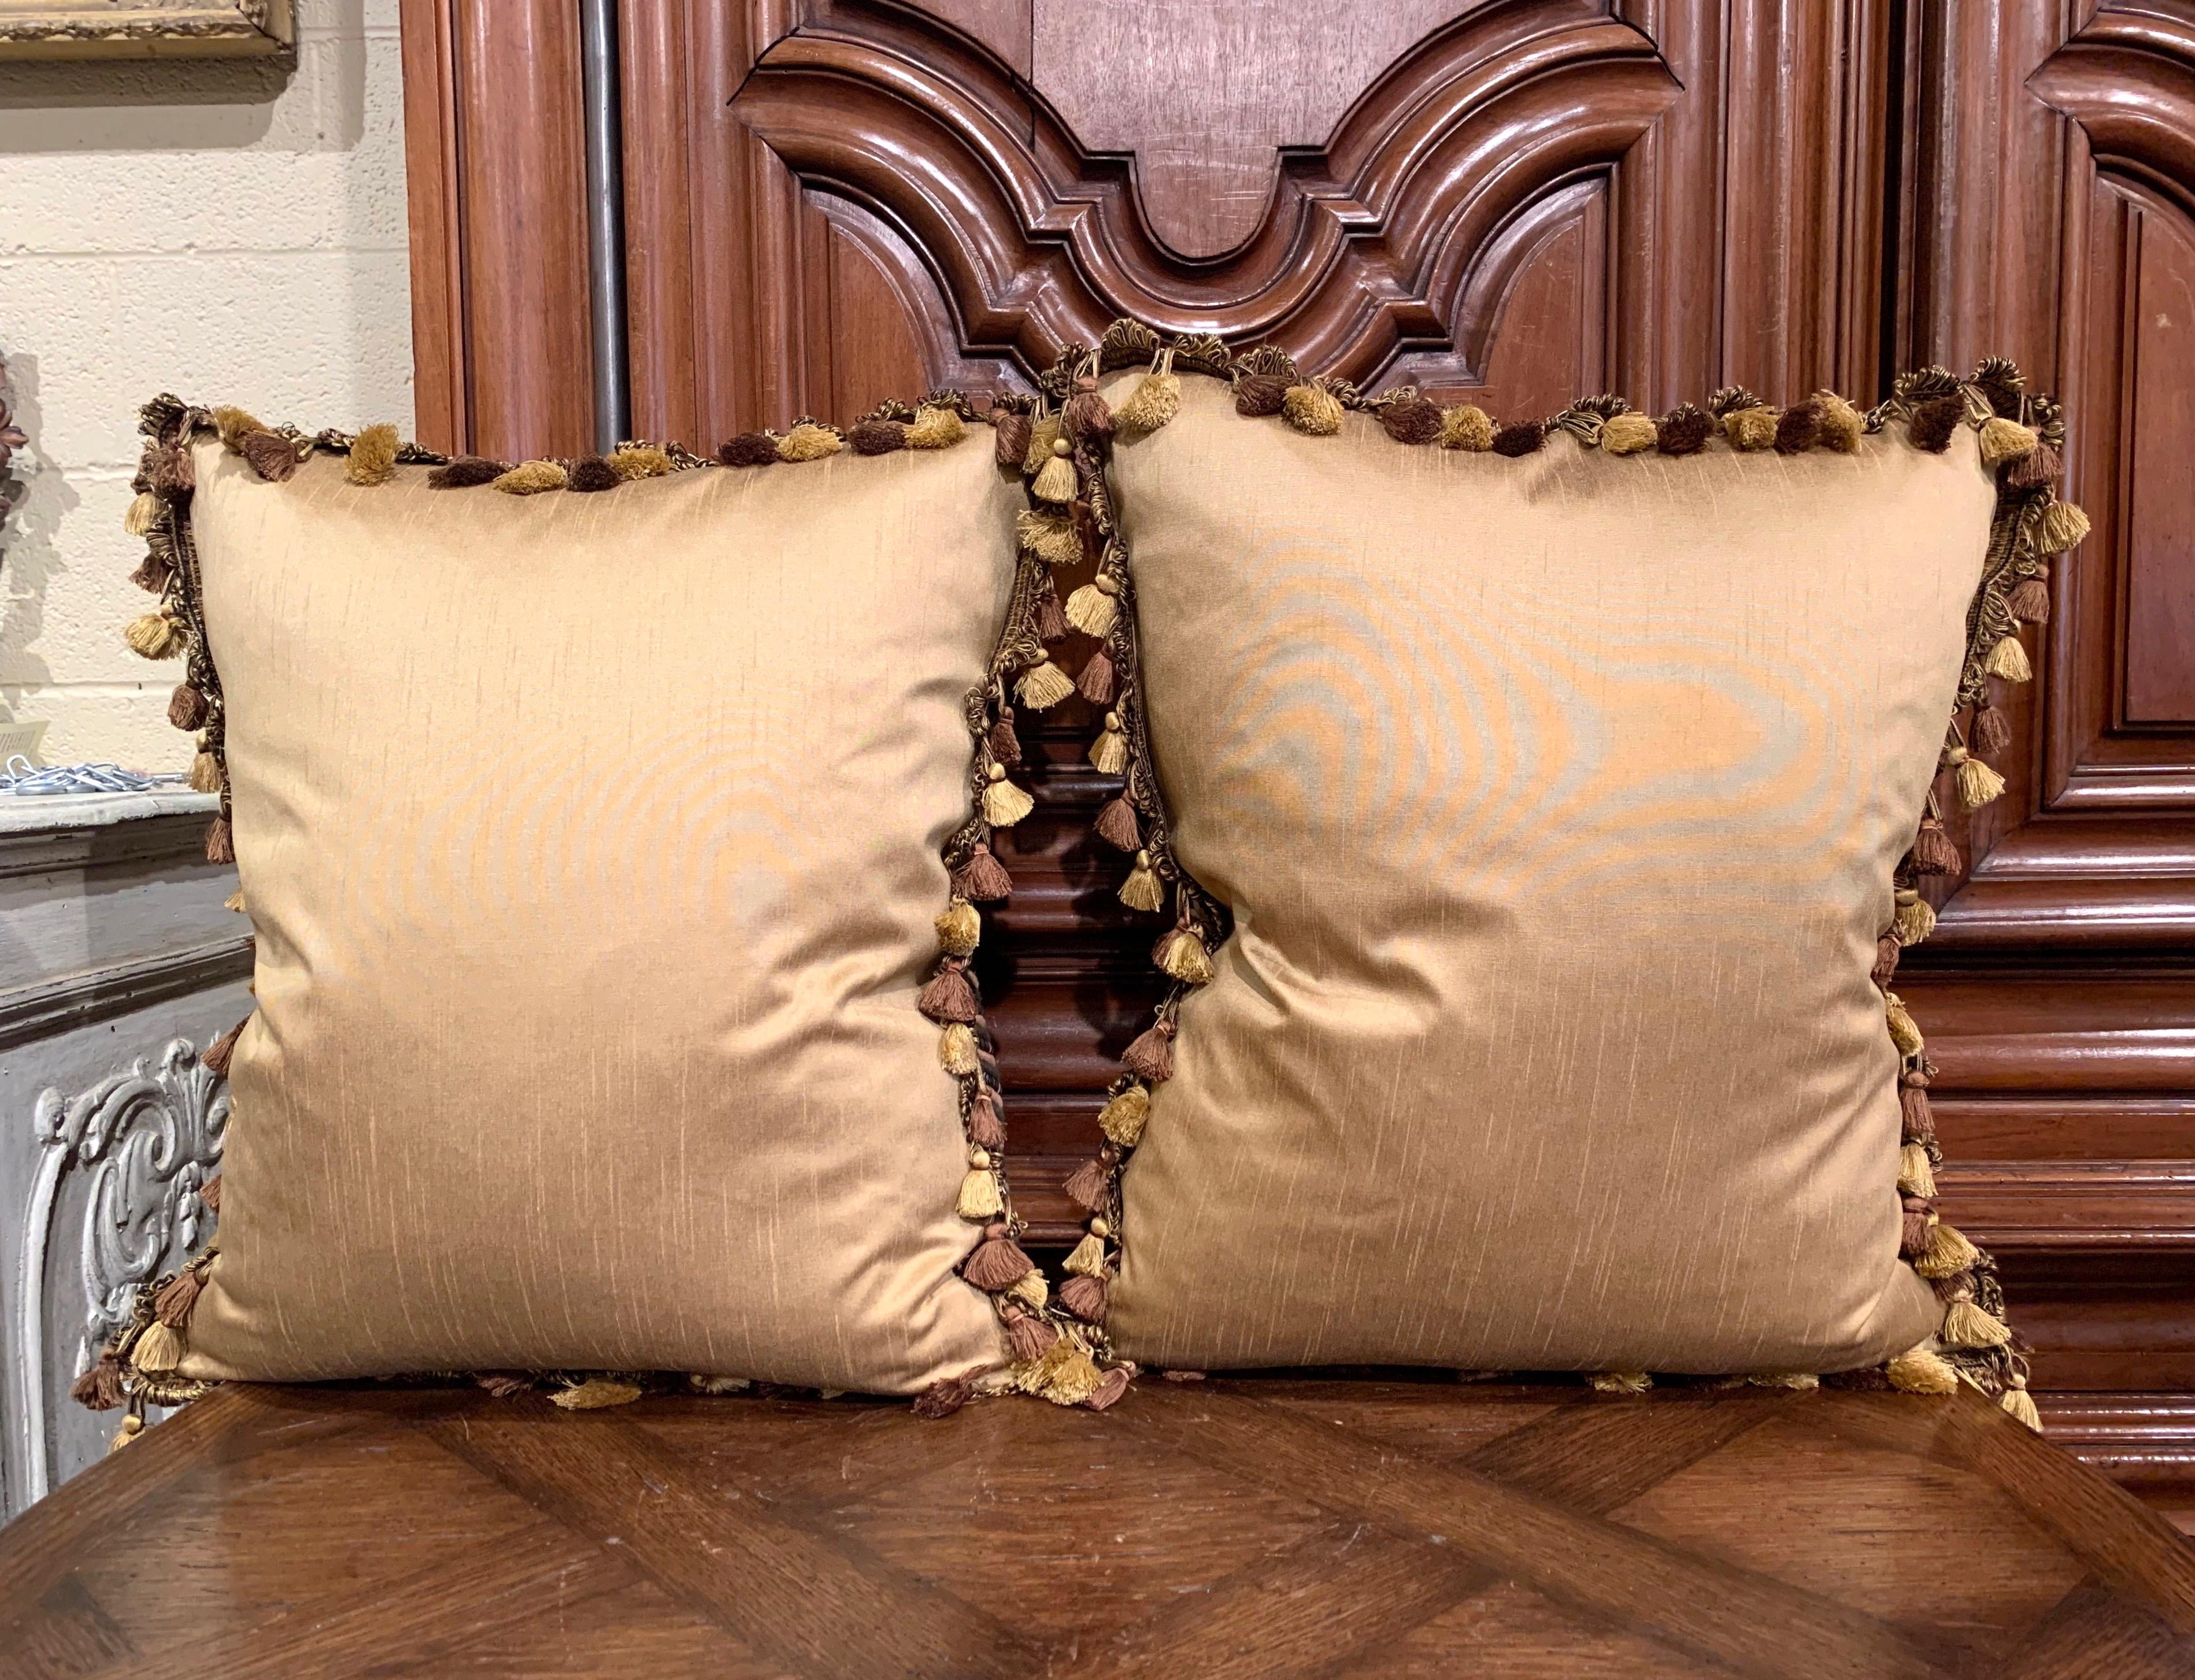 Velvet Pair of Down Pillows Made with 18th Century Aubusson Tapestry, Trim and Tassels